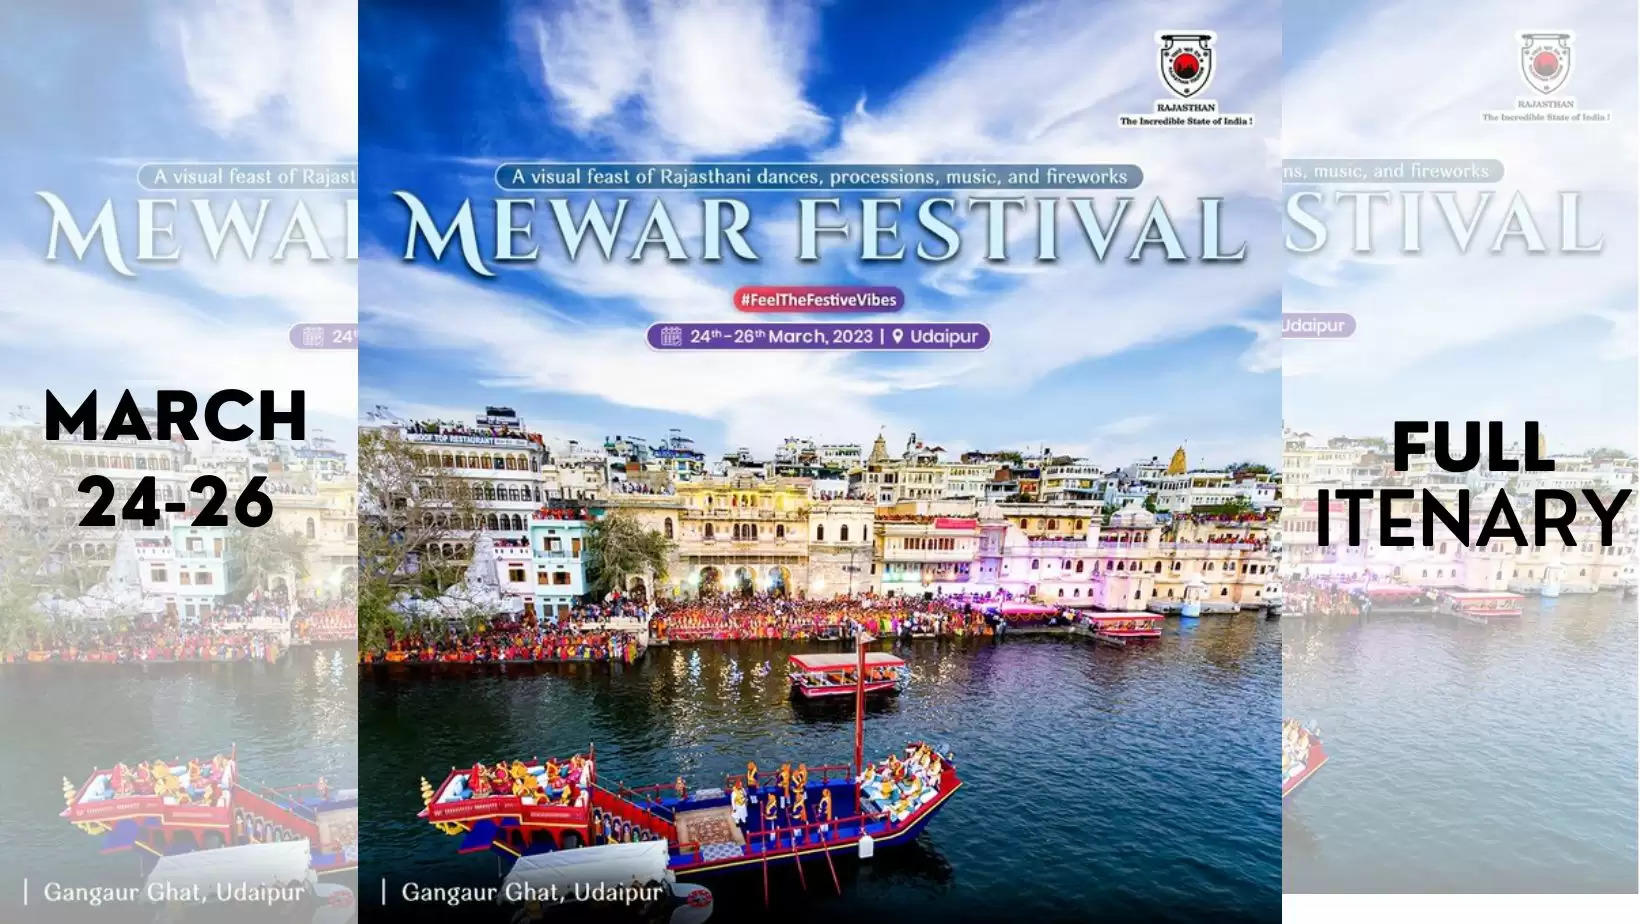 Mewar Festival Udaipur Full Itenary Schedule Full Itnerary, Events in Udaipur